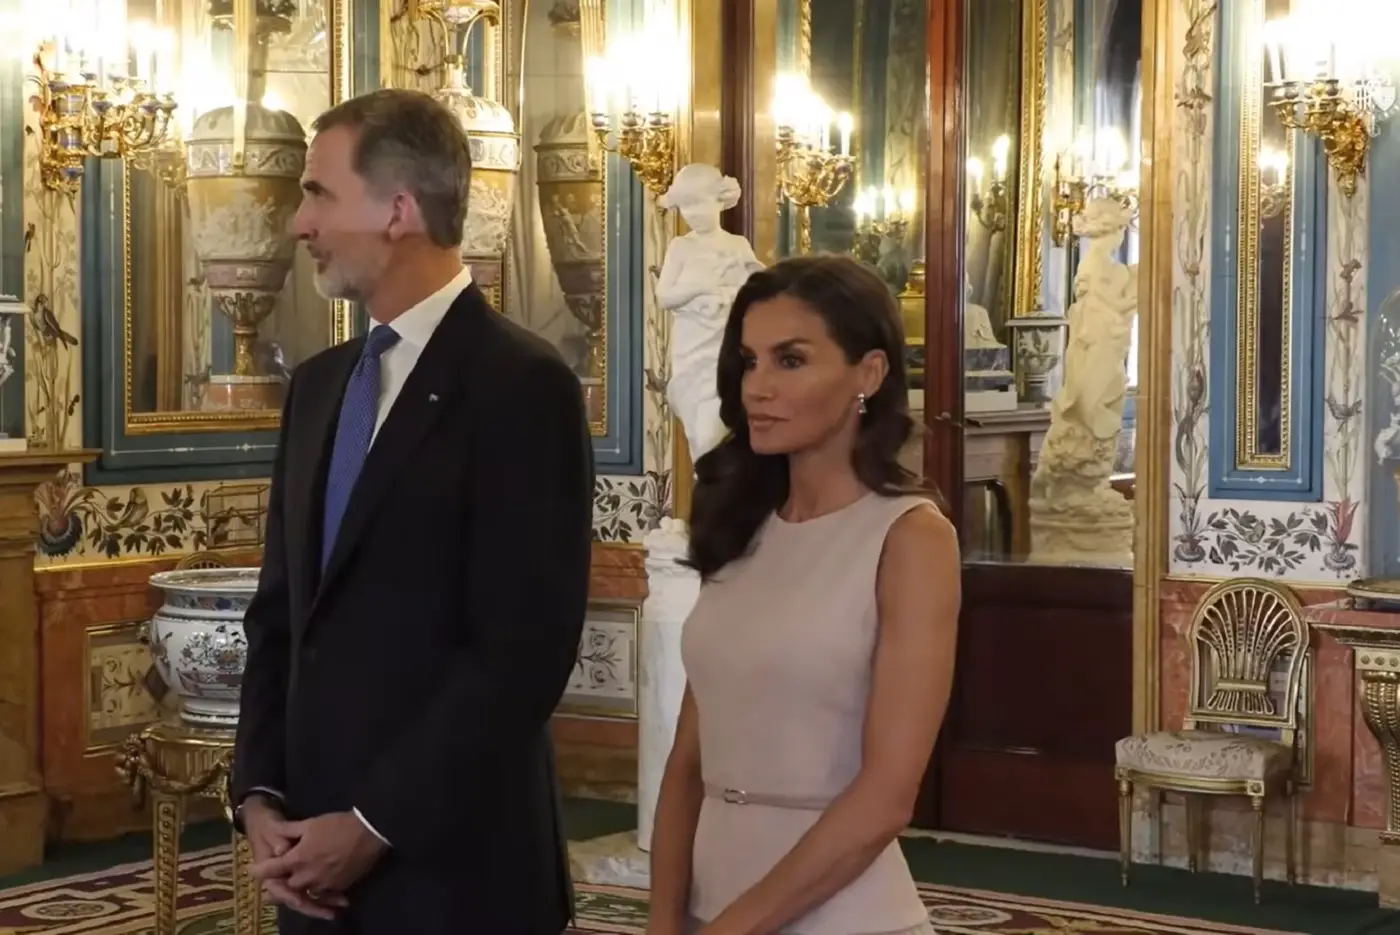 King Felipe and Queen Letizia presided over the NATO lunch | RegalFille